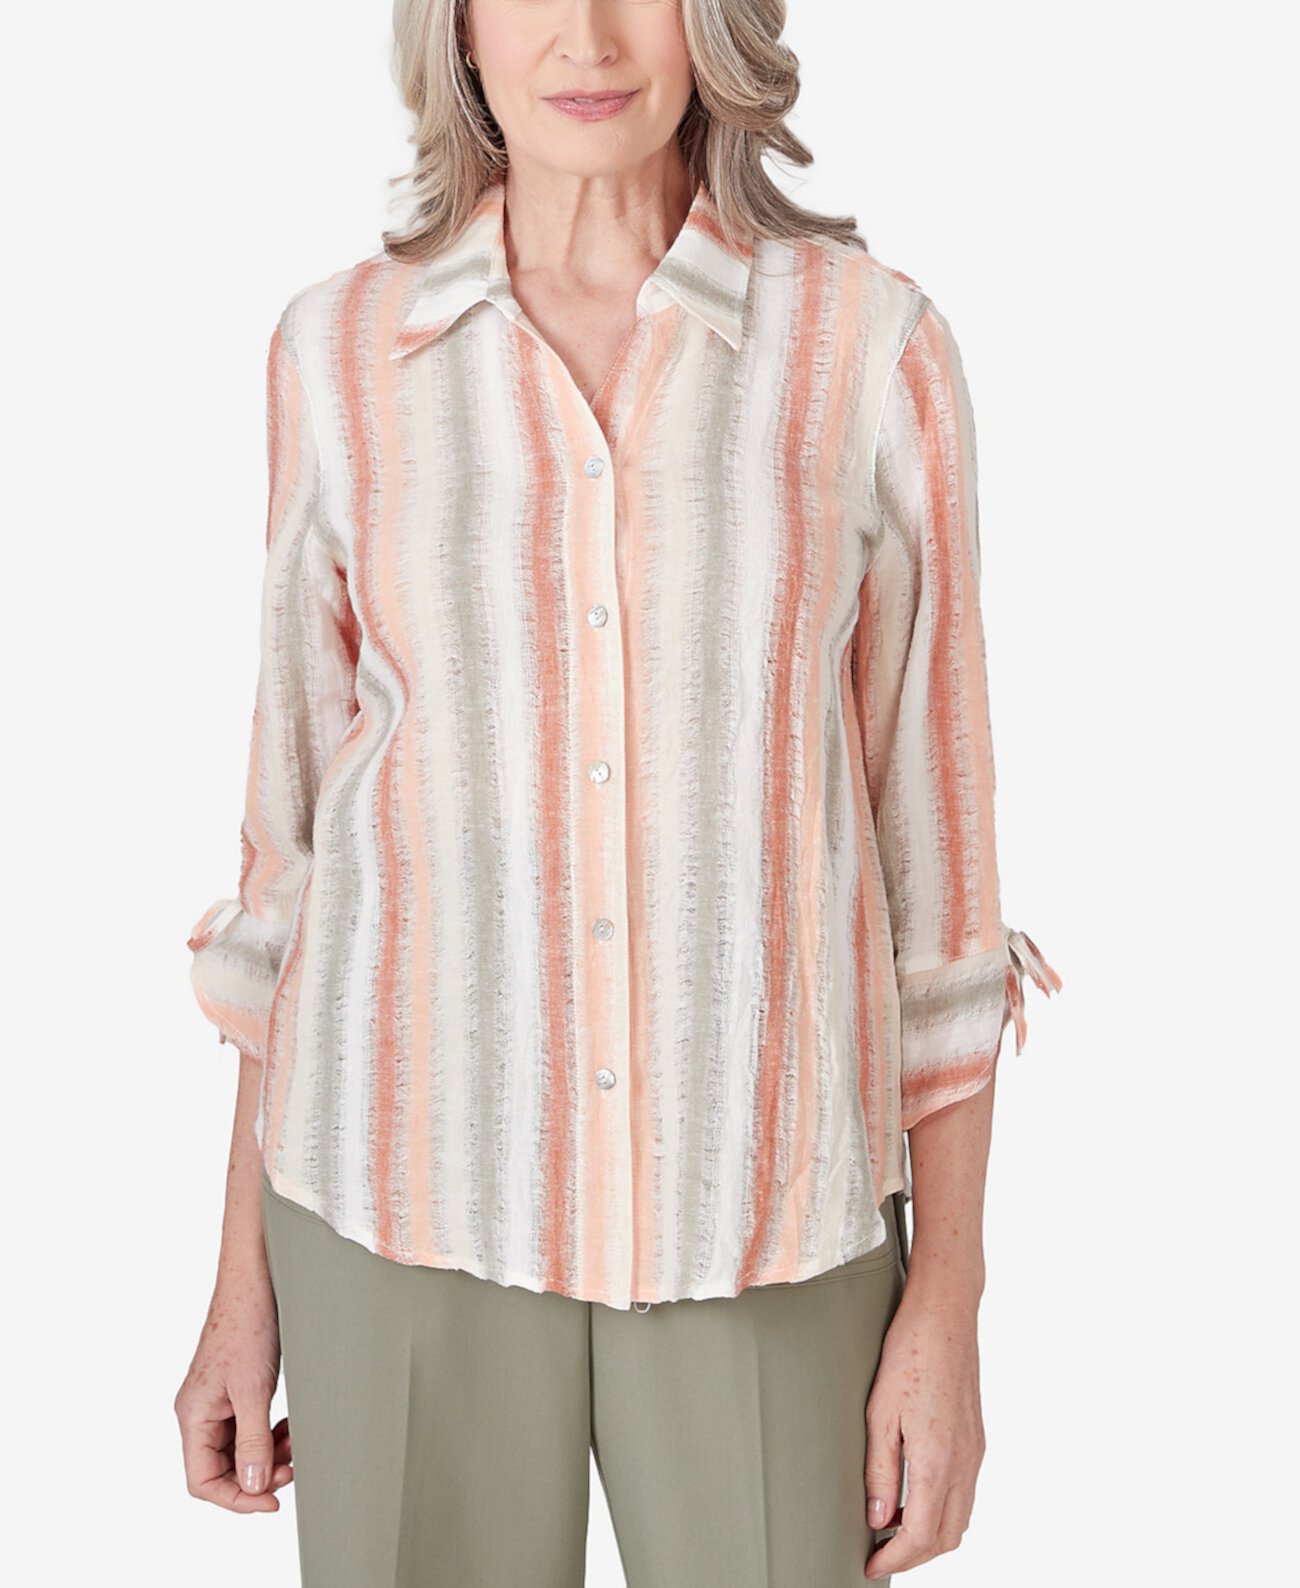 Women's Tuscan Sunset Striped Textured Button Down Top Alfred Dunner